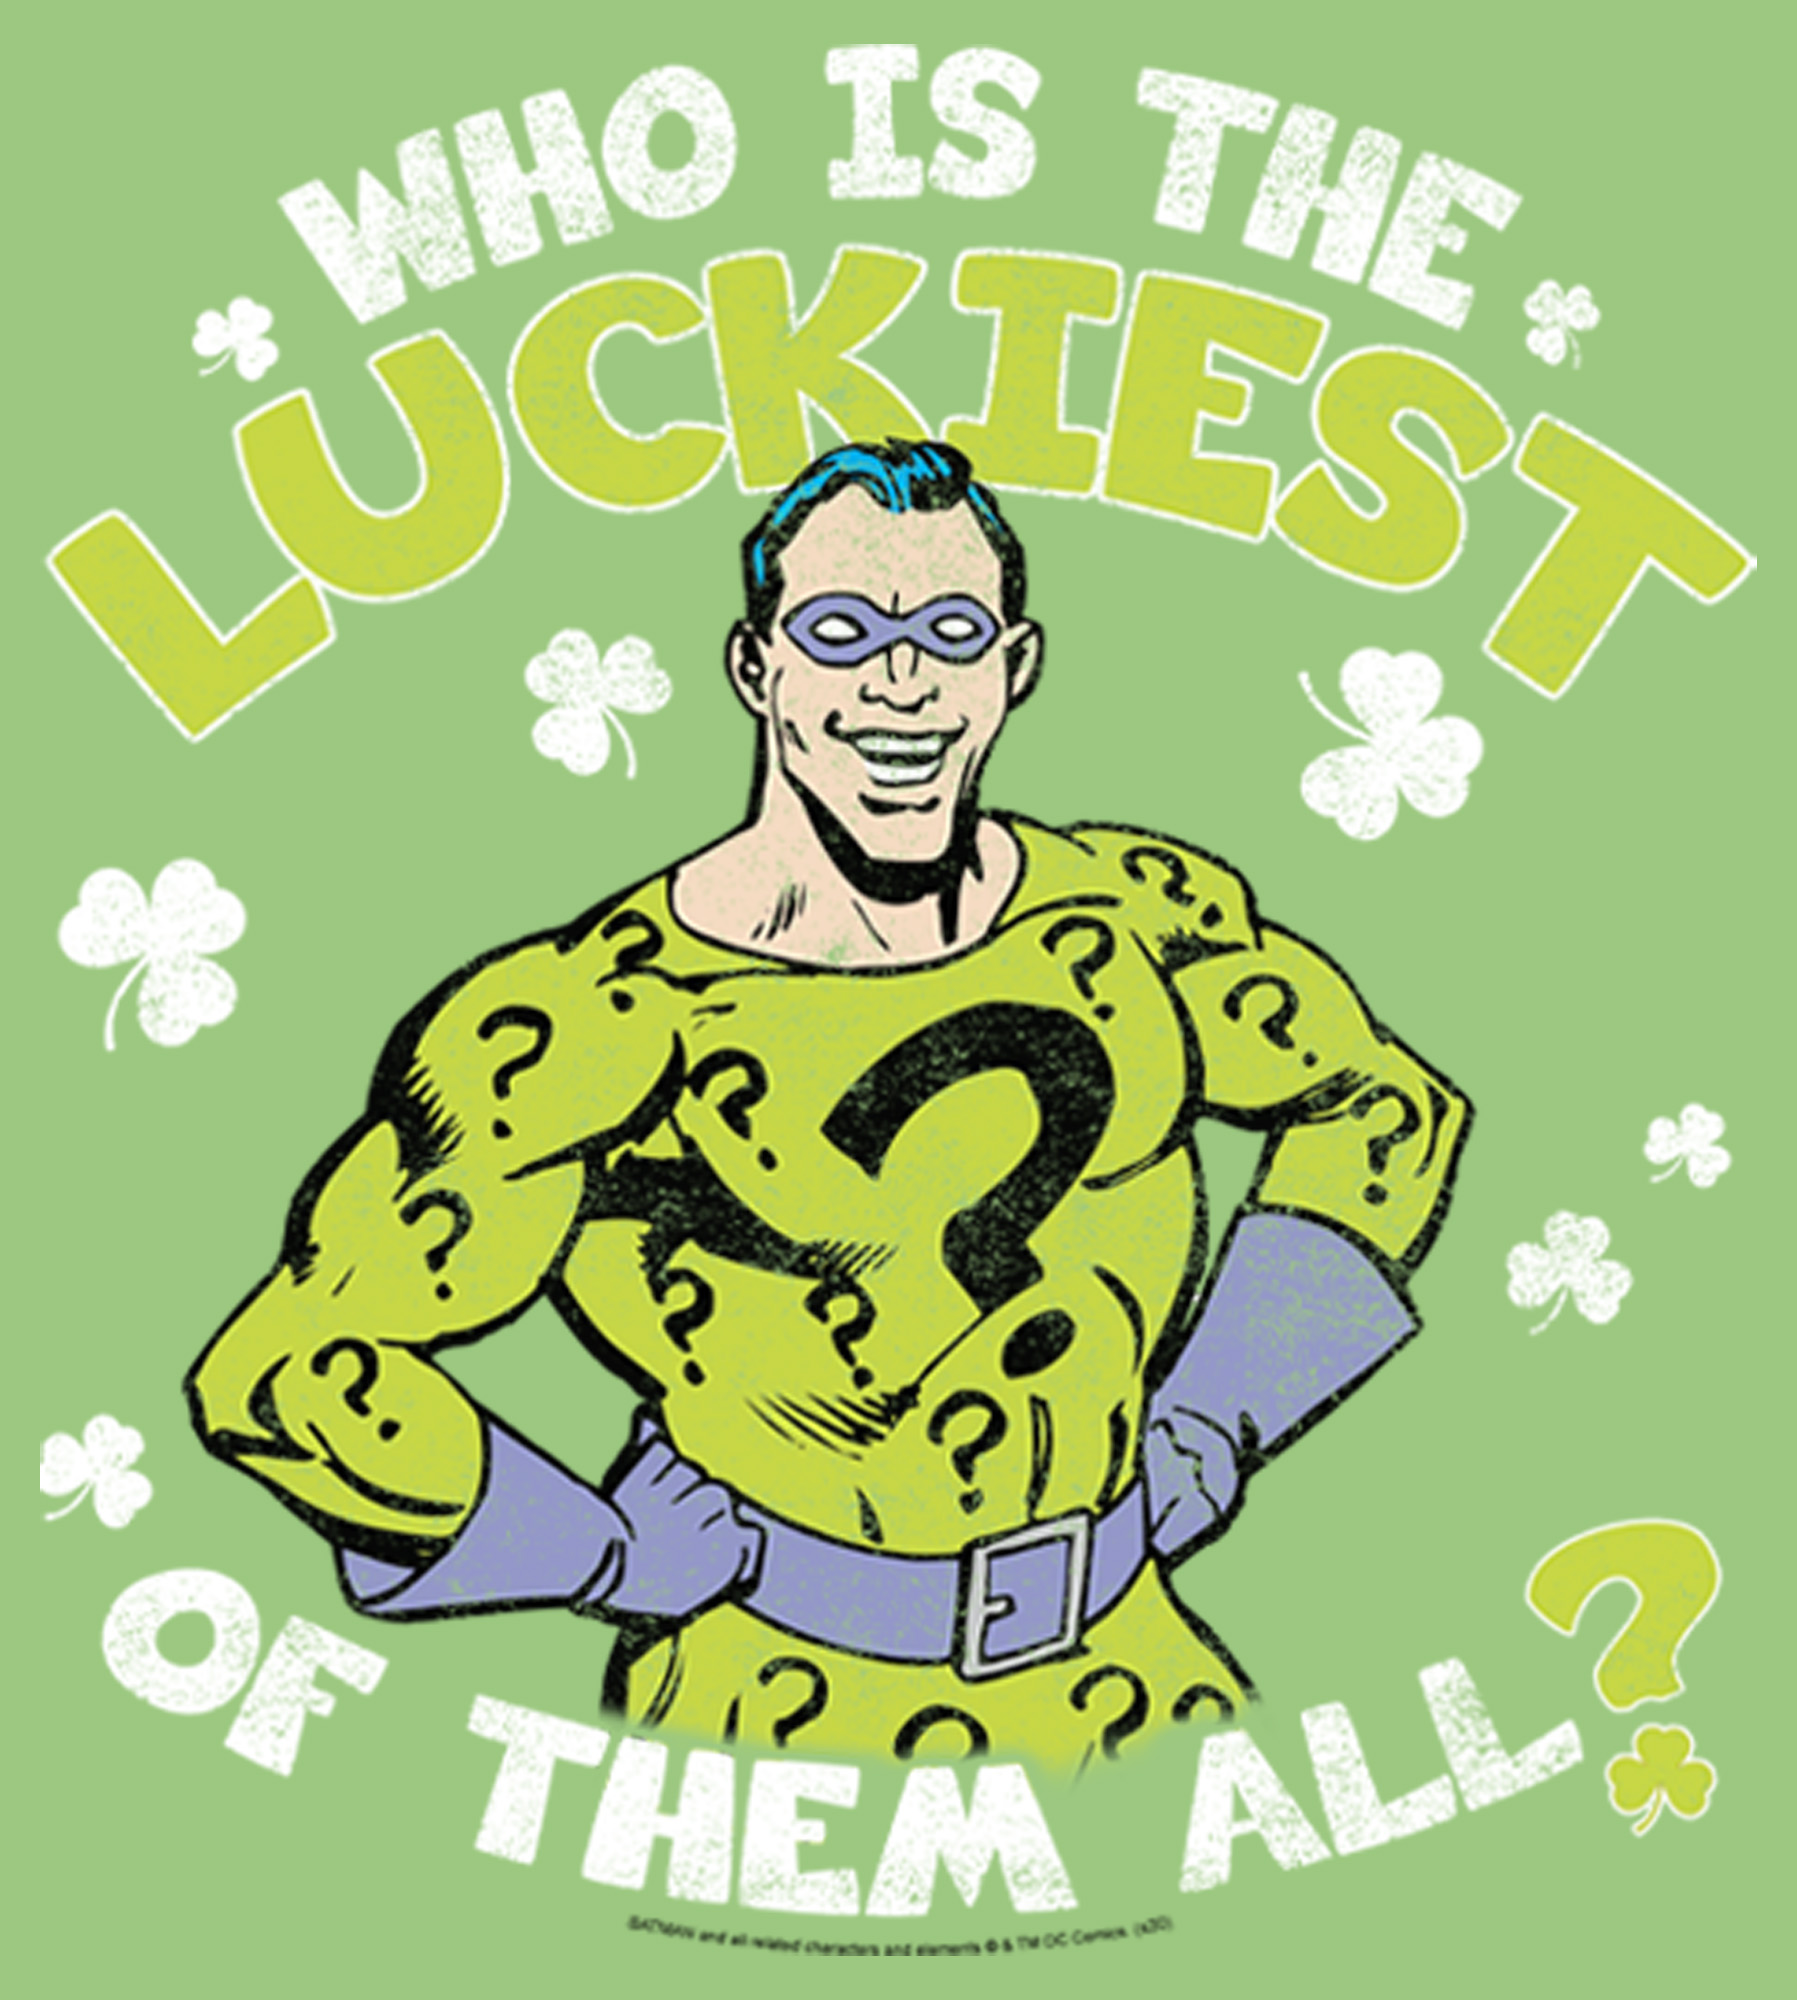 DC Comics Girl's Batman St. Patrick's Day Riddler Who is the Luckiest of Them All?  Graphic Tee